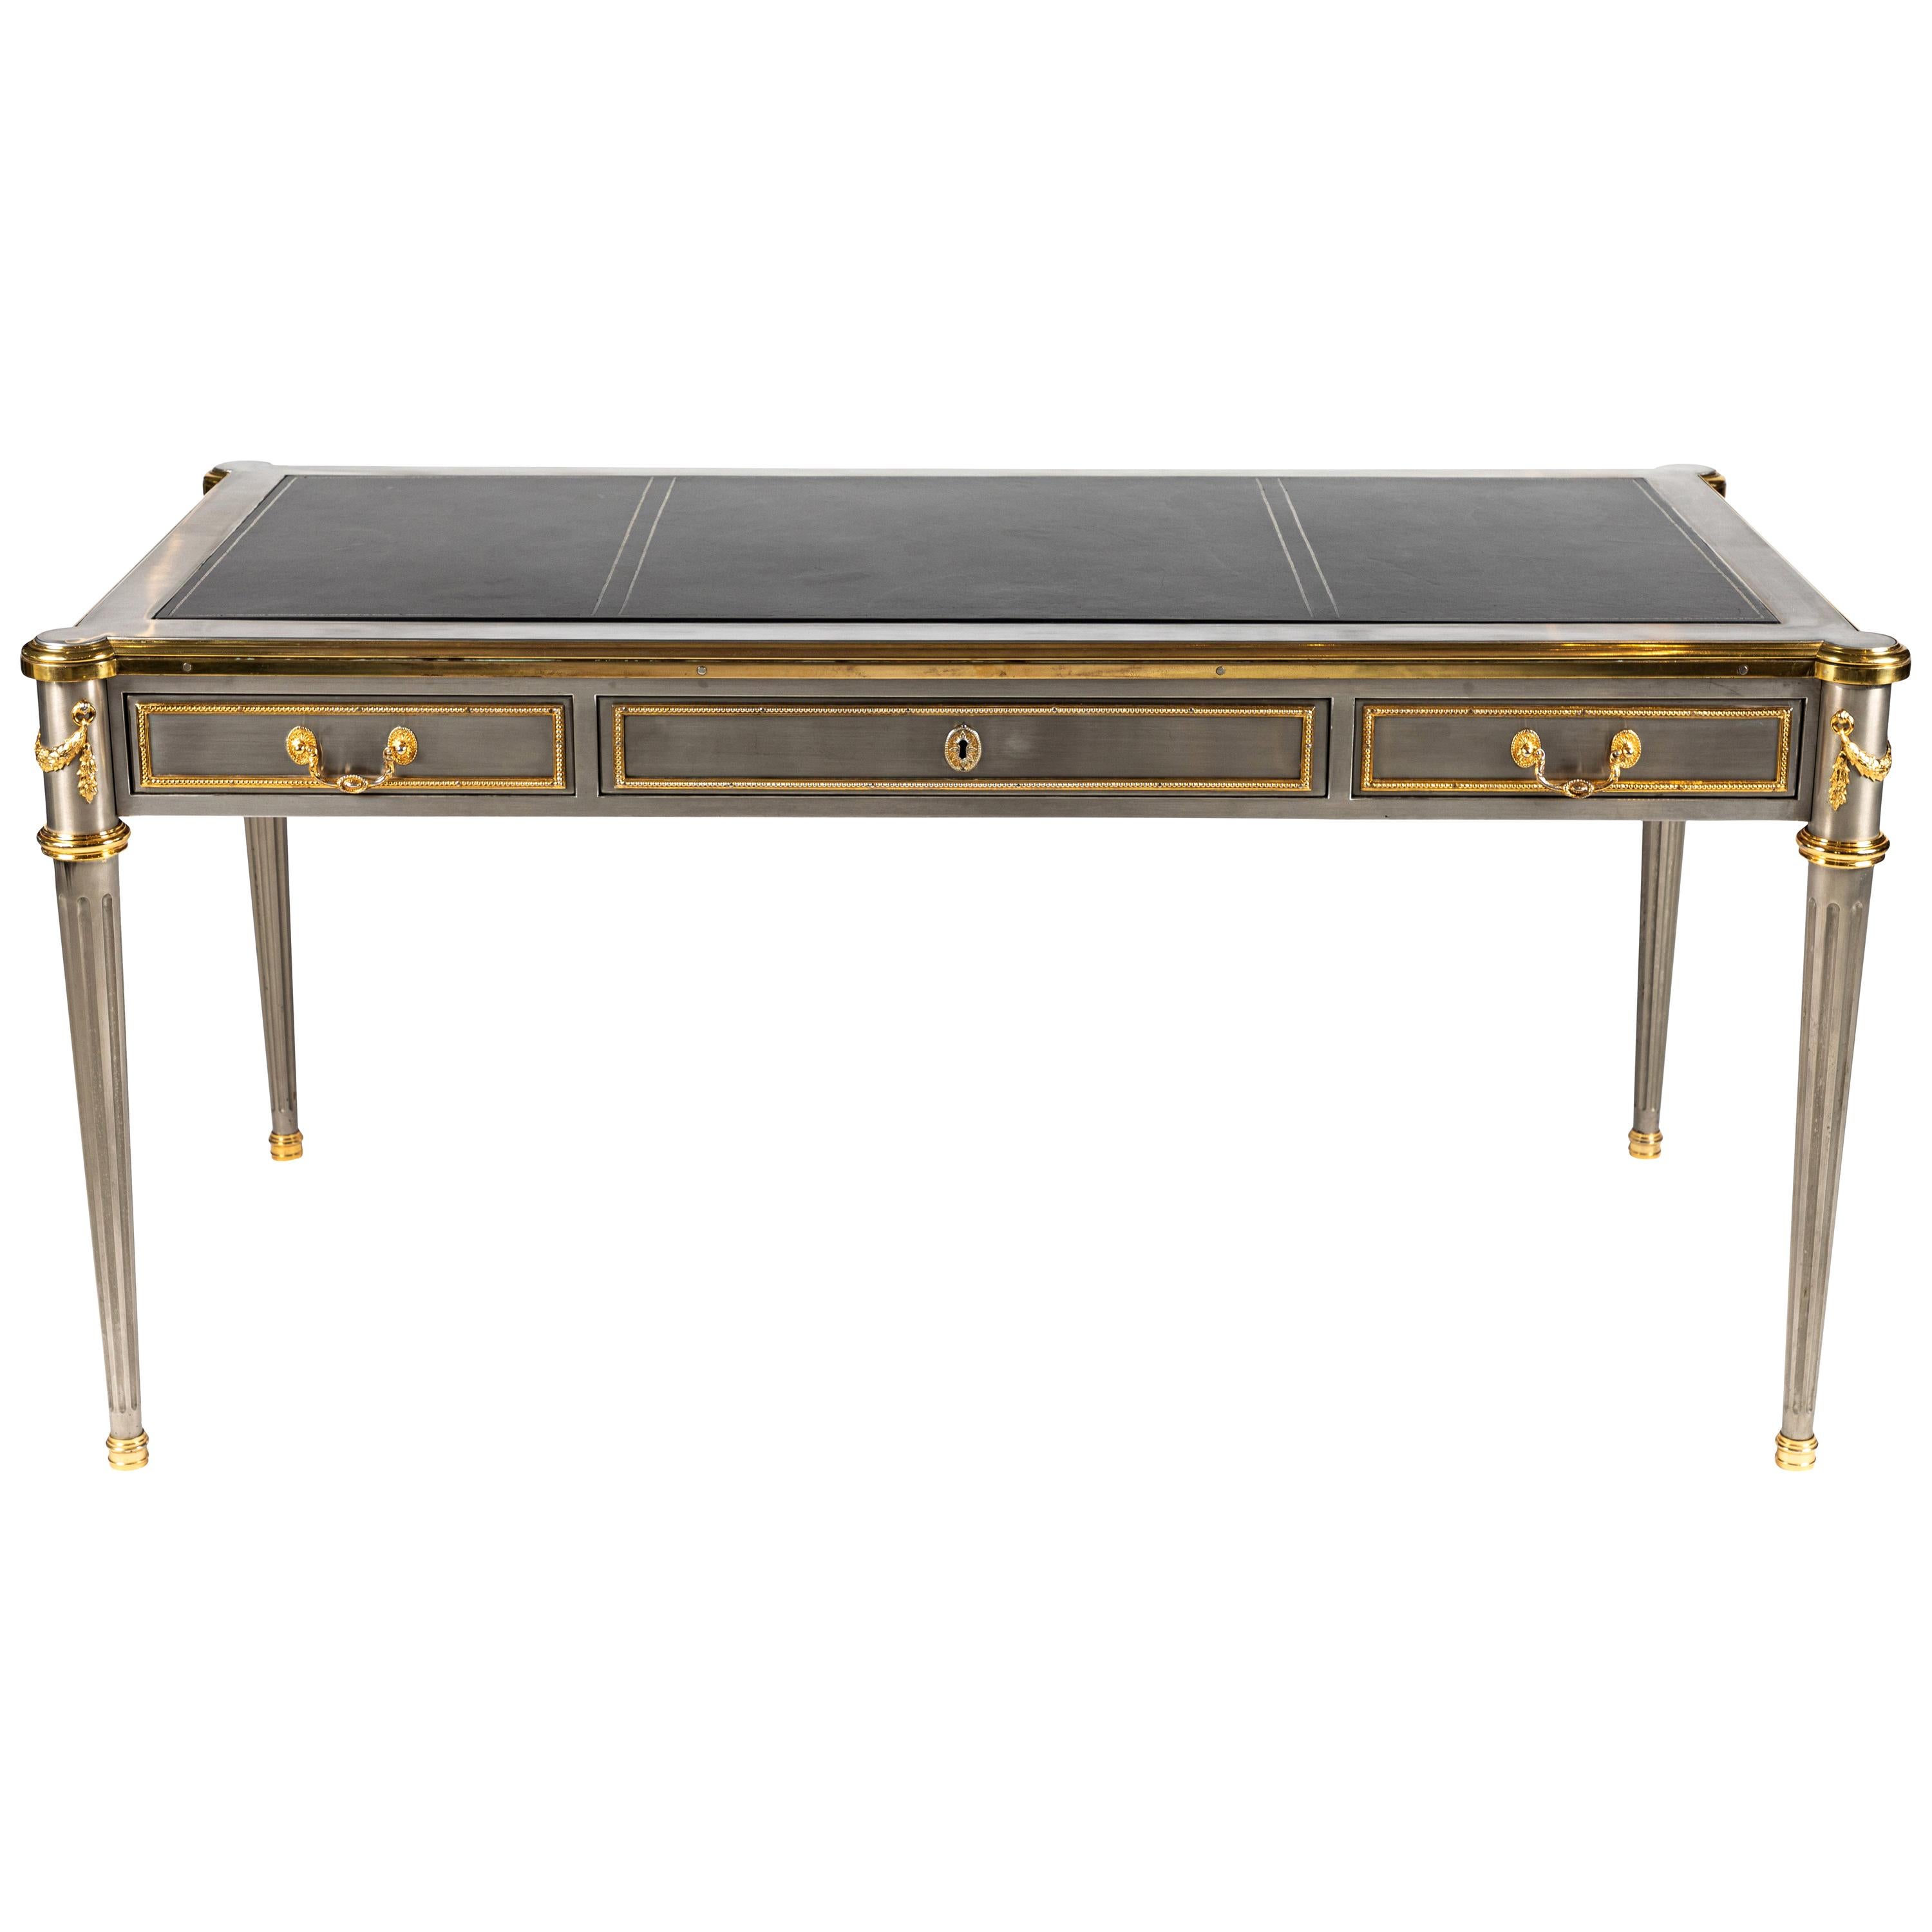 Steel and Bronze Dore Writing Desk with Leather Top by John Vesey